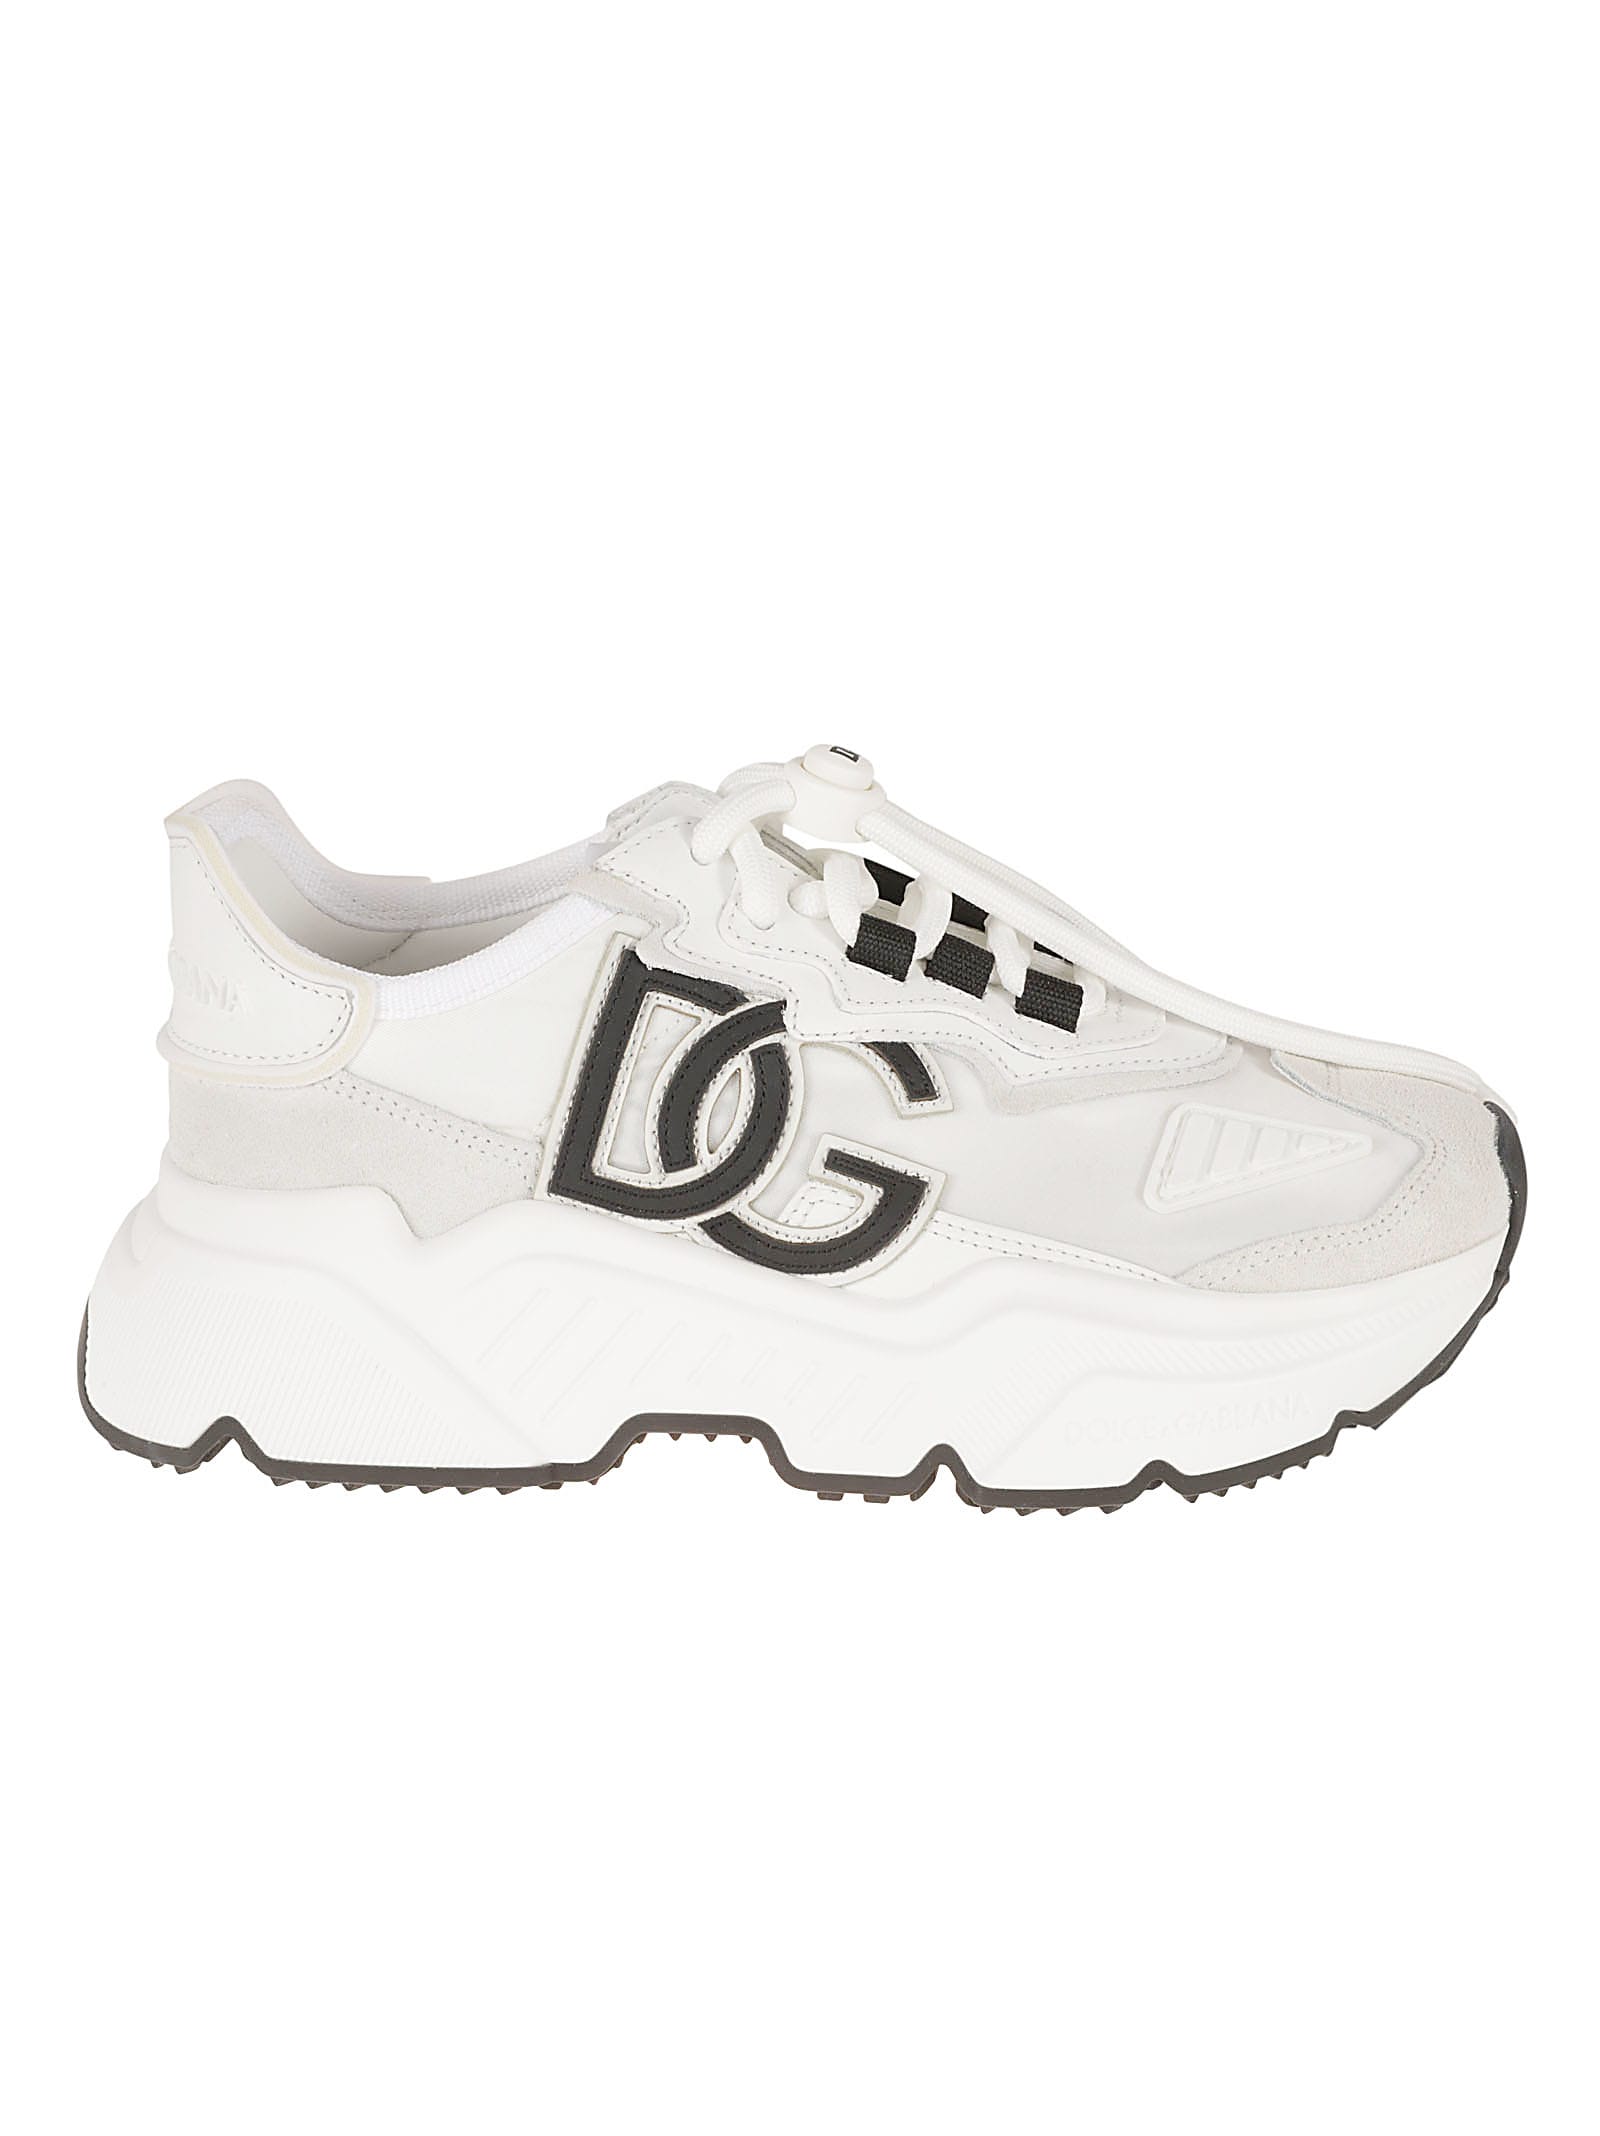 Dolce & Gabbana Initials Logo Lace-up Sneakers